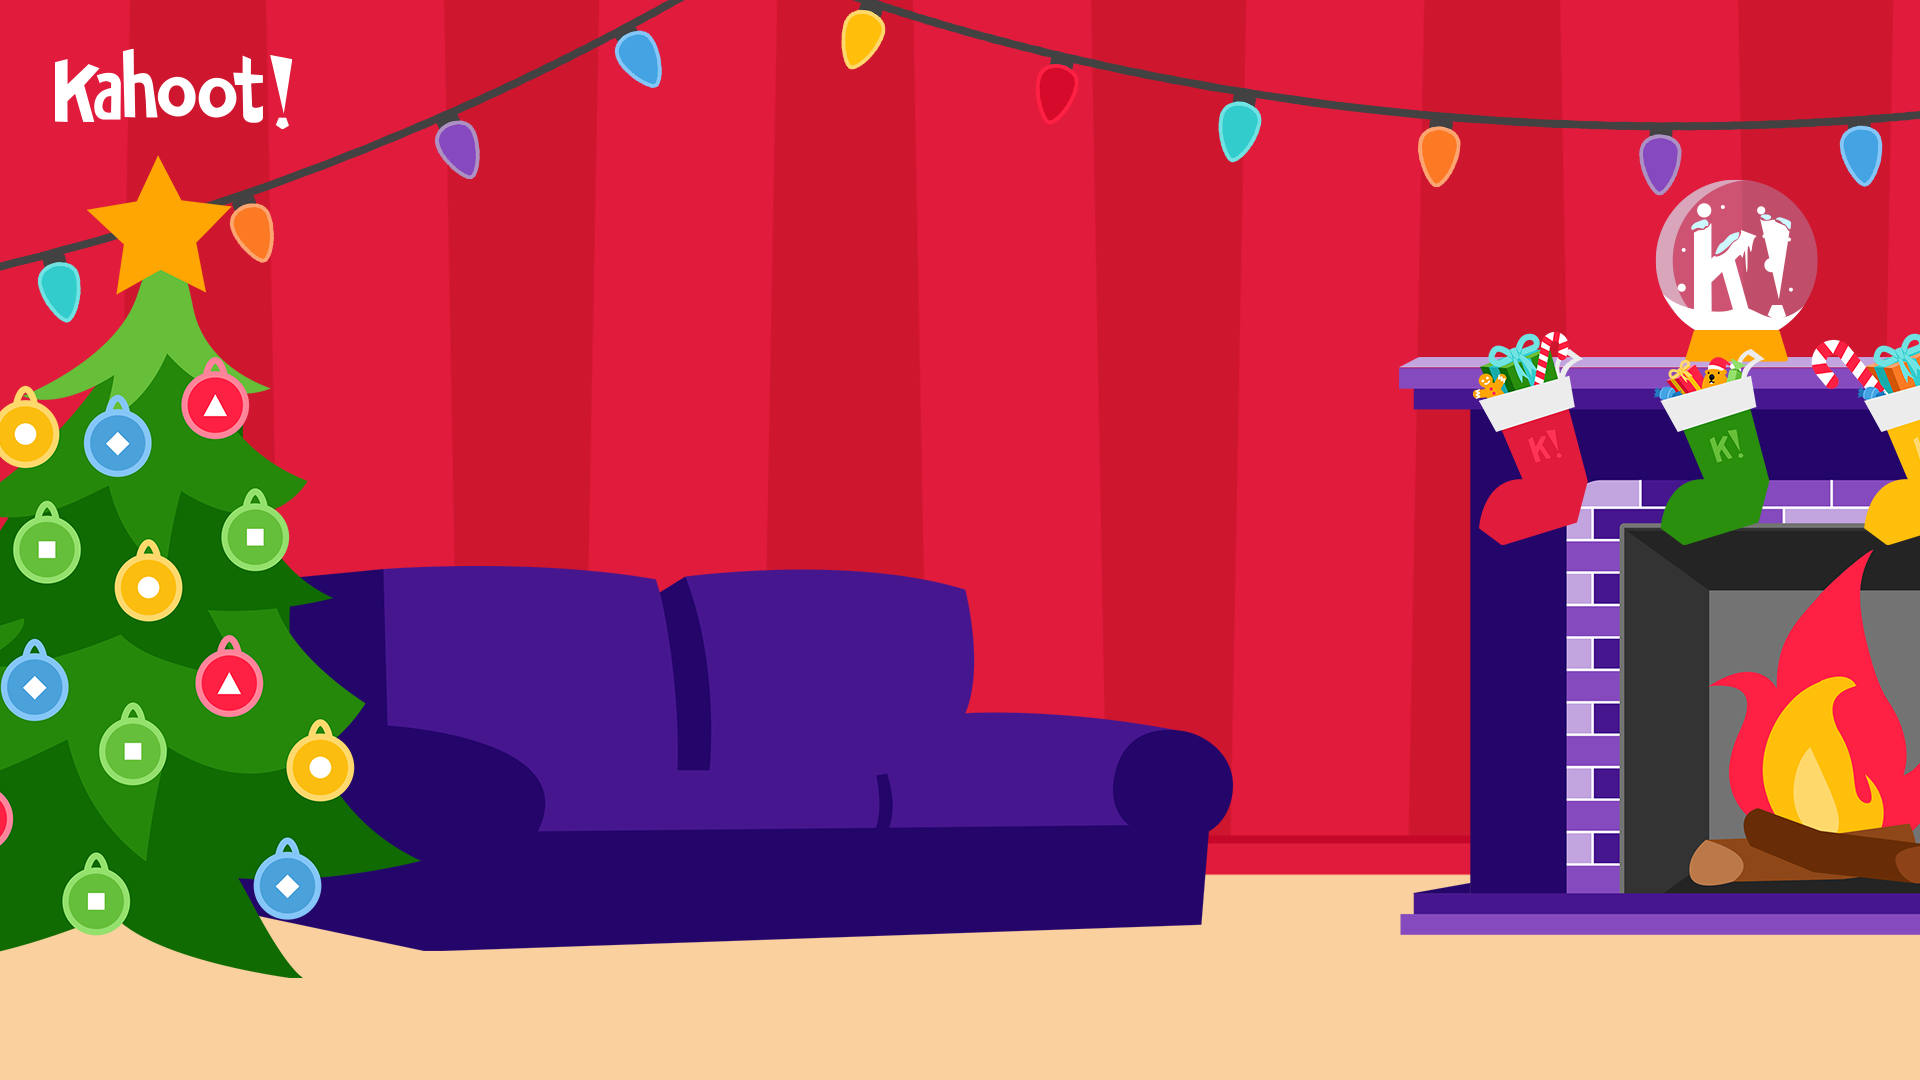 Festive virtual backgrounds for video calls by Kahoot!